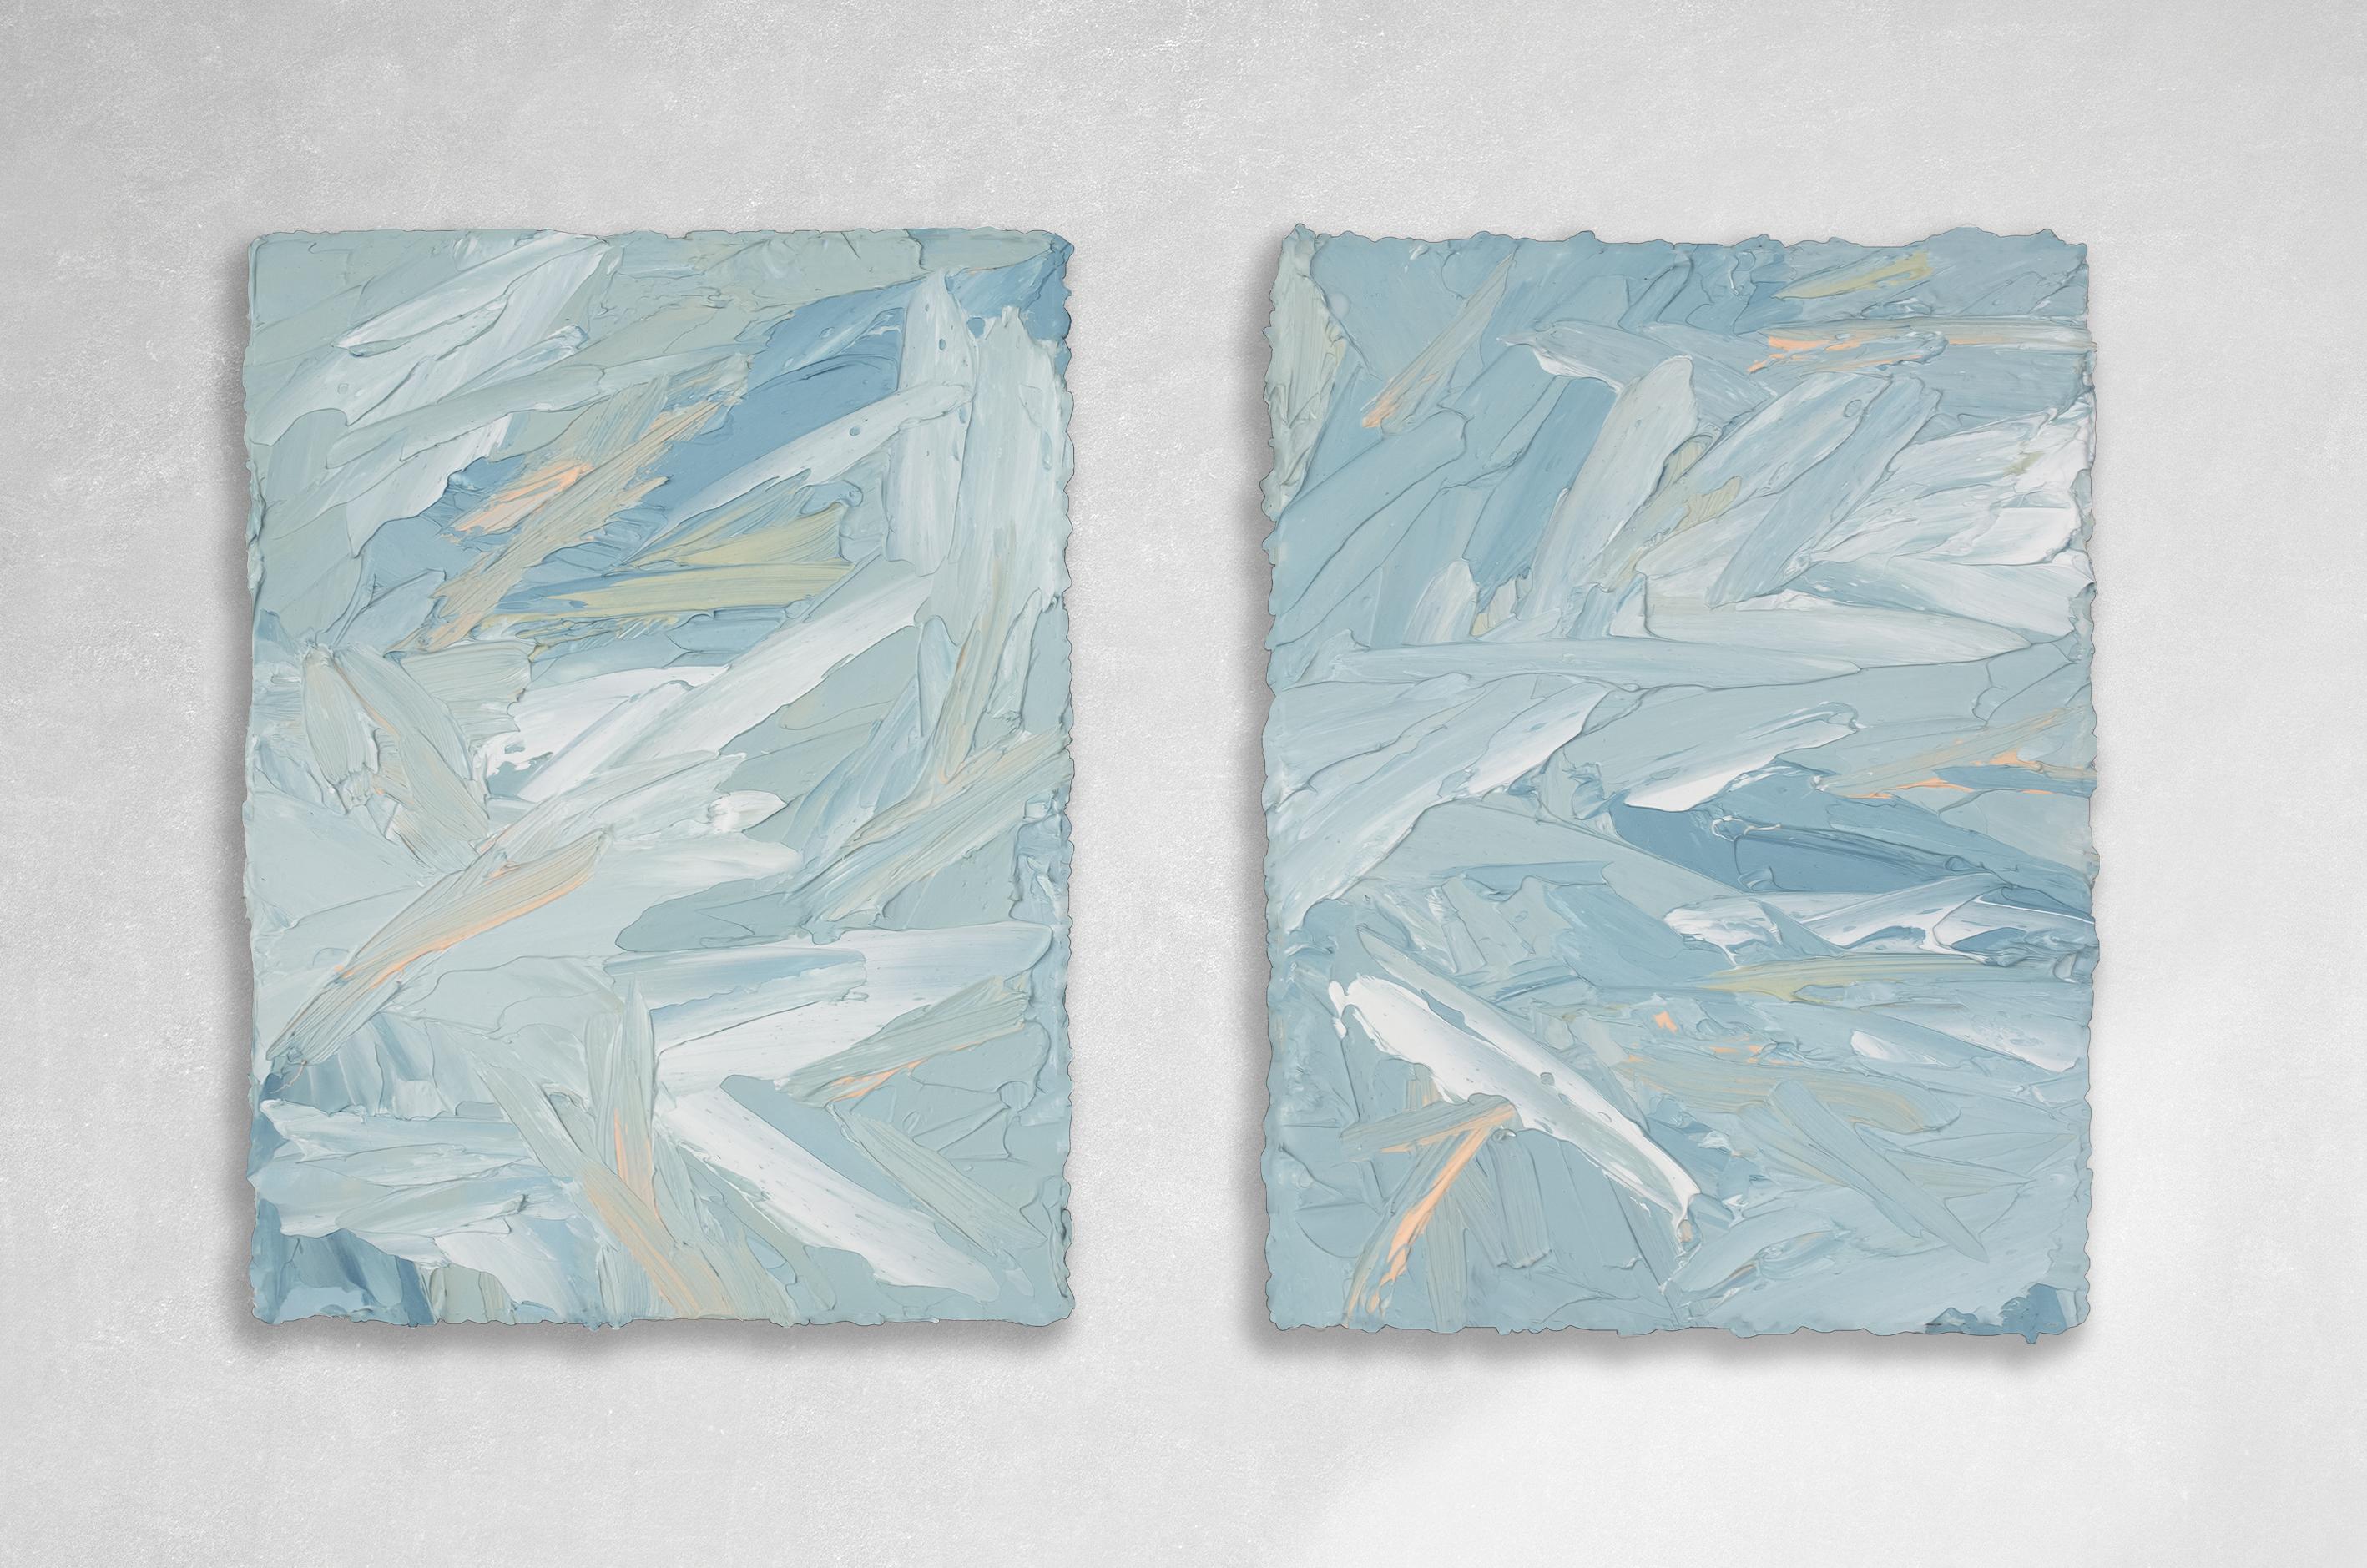 Teodora Guererra Abstract Sculpture - "Wandering Around" Abstract Diptych Painting